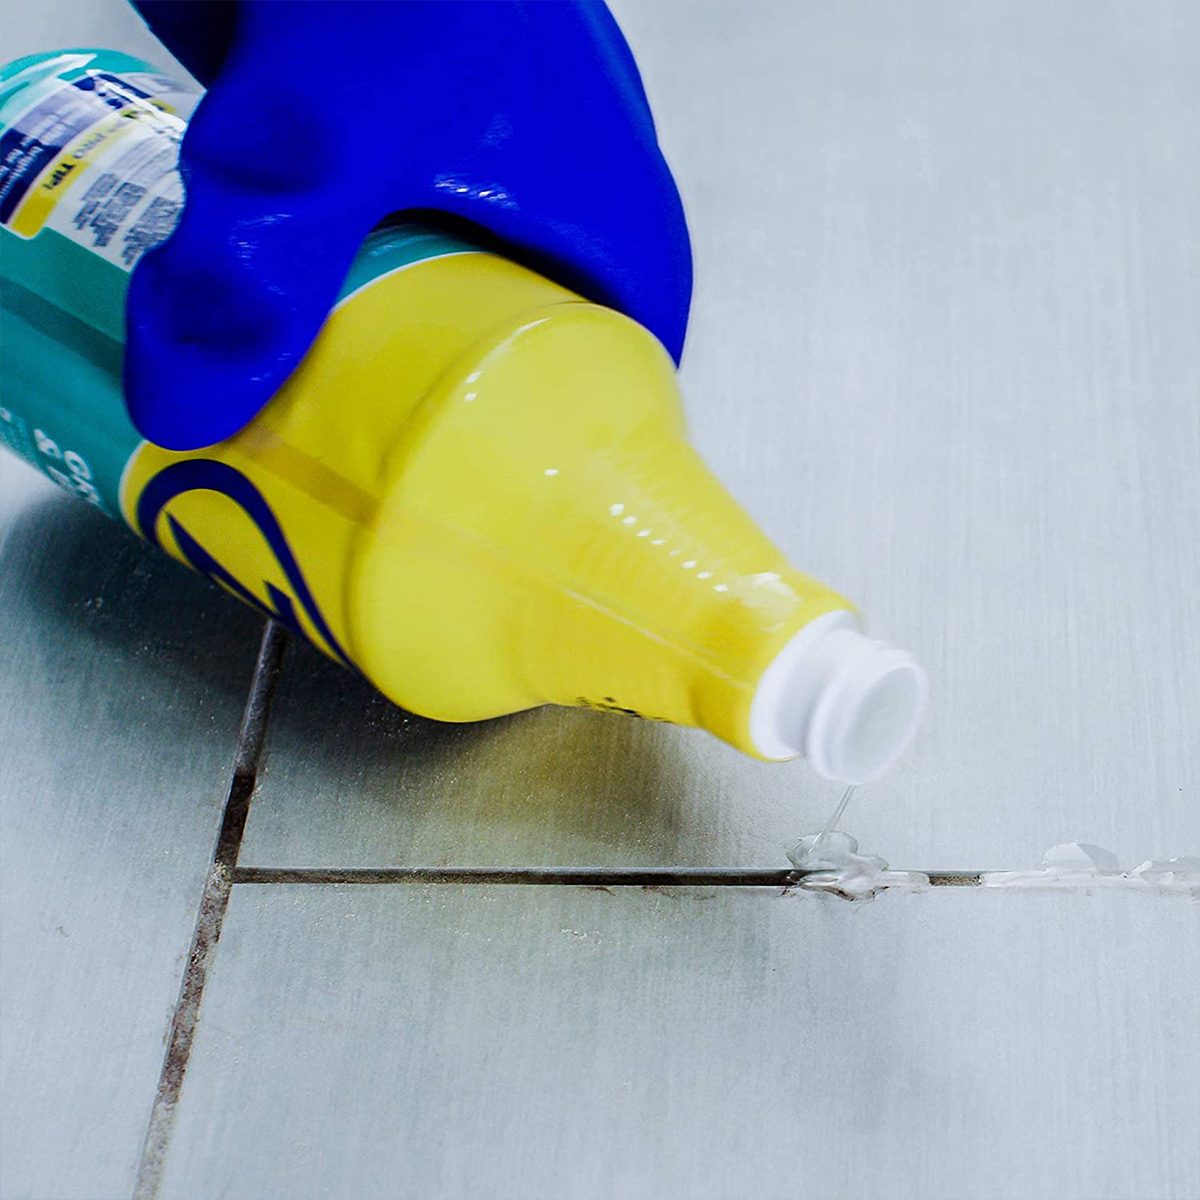 Transform Your Grout with Goo Gone Grout & Tile Cleaner